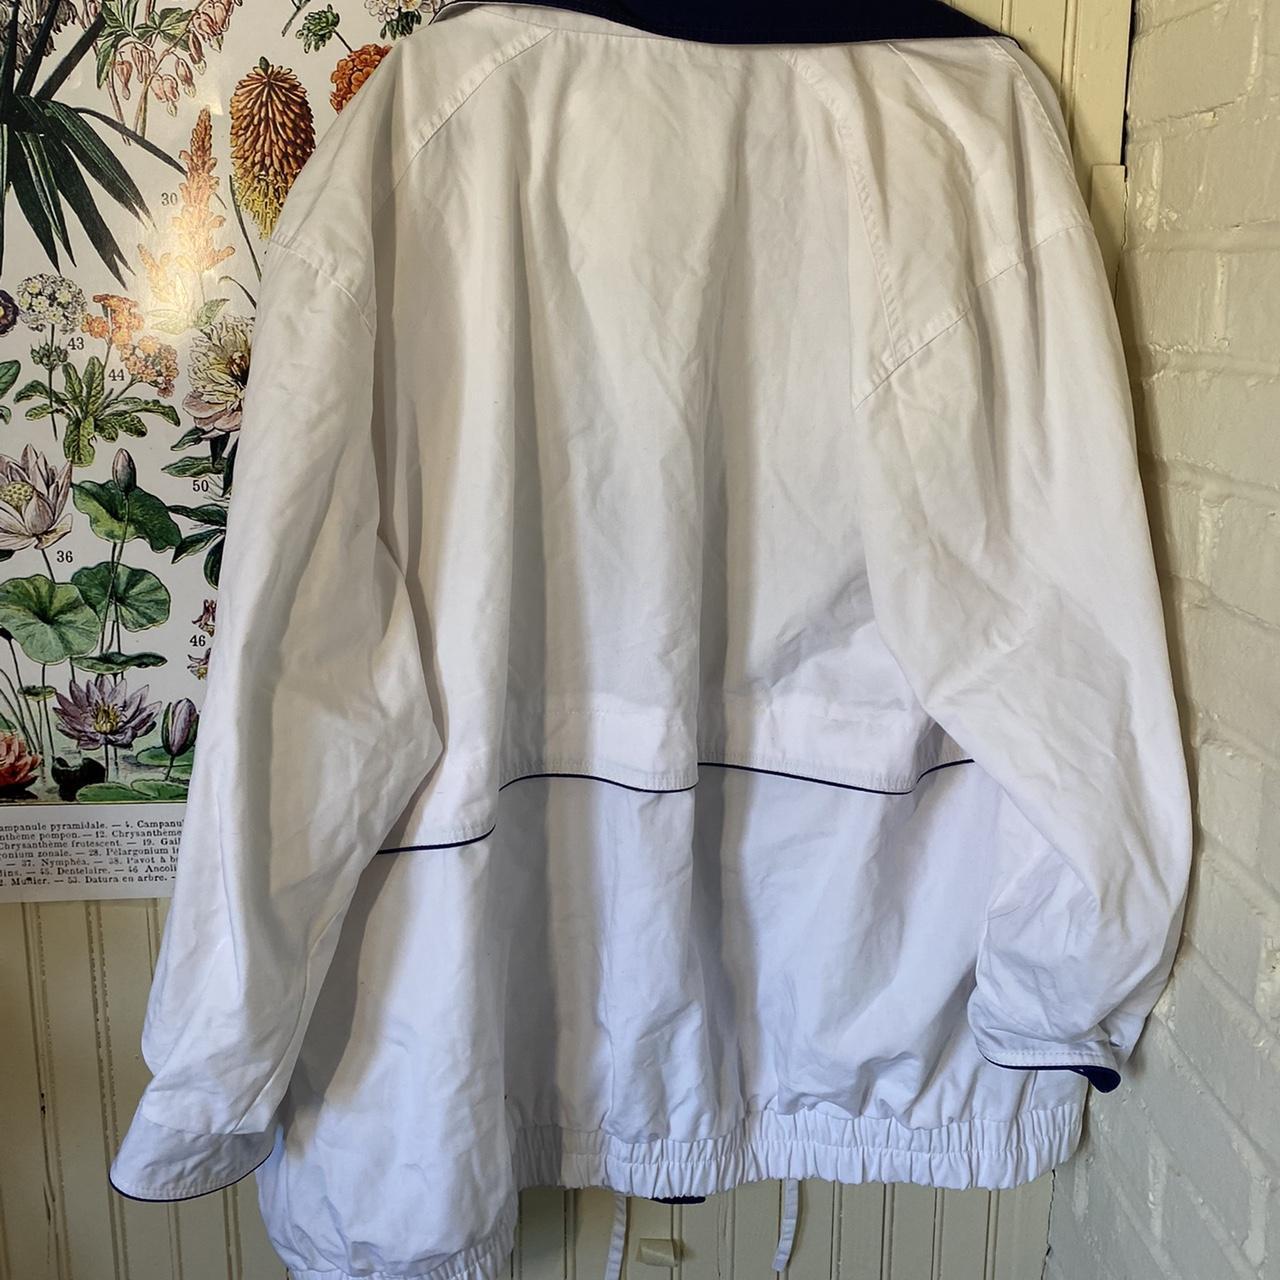 Current Seen Women's White and Navy Jacket (2)